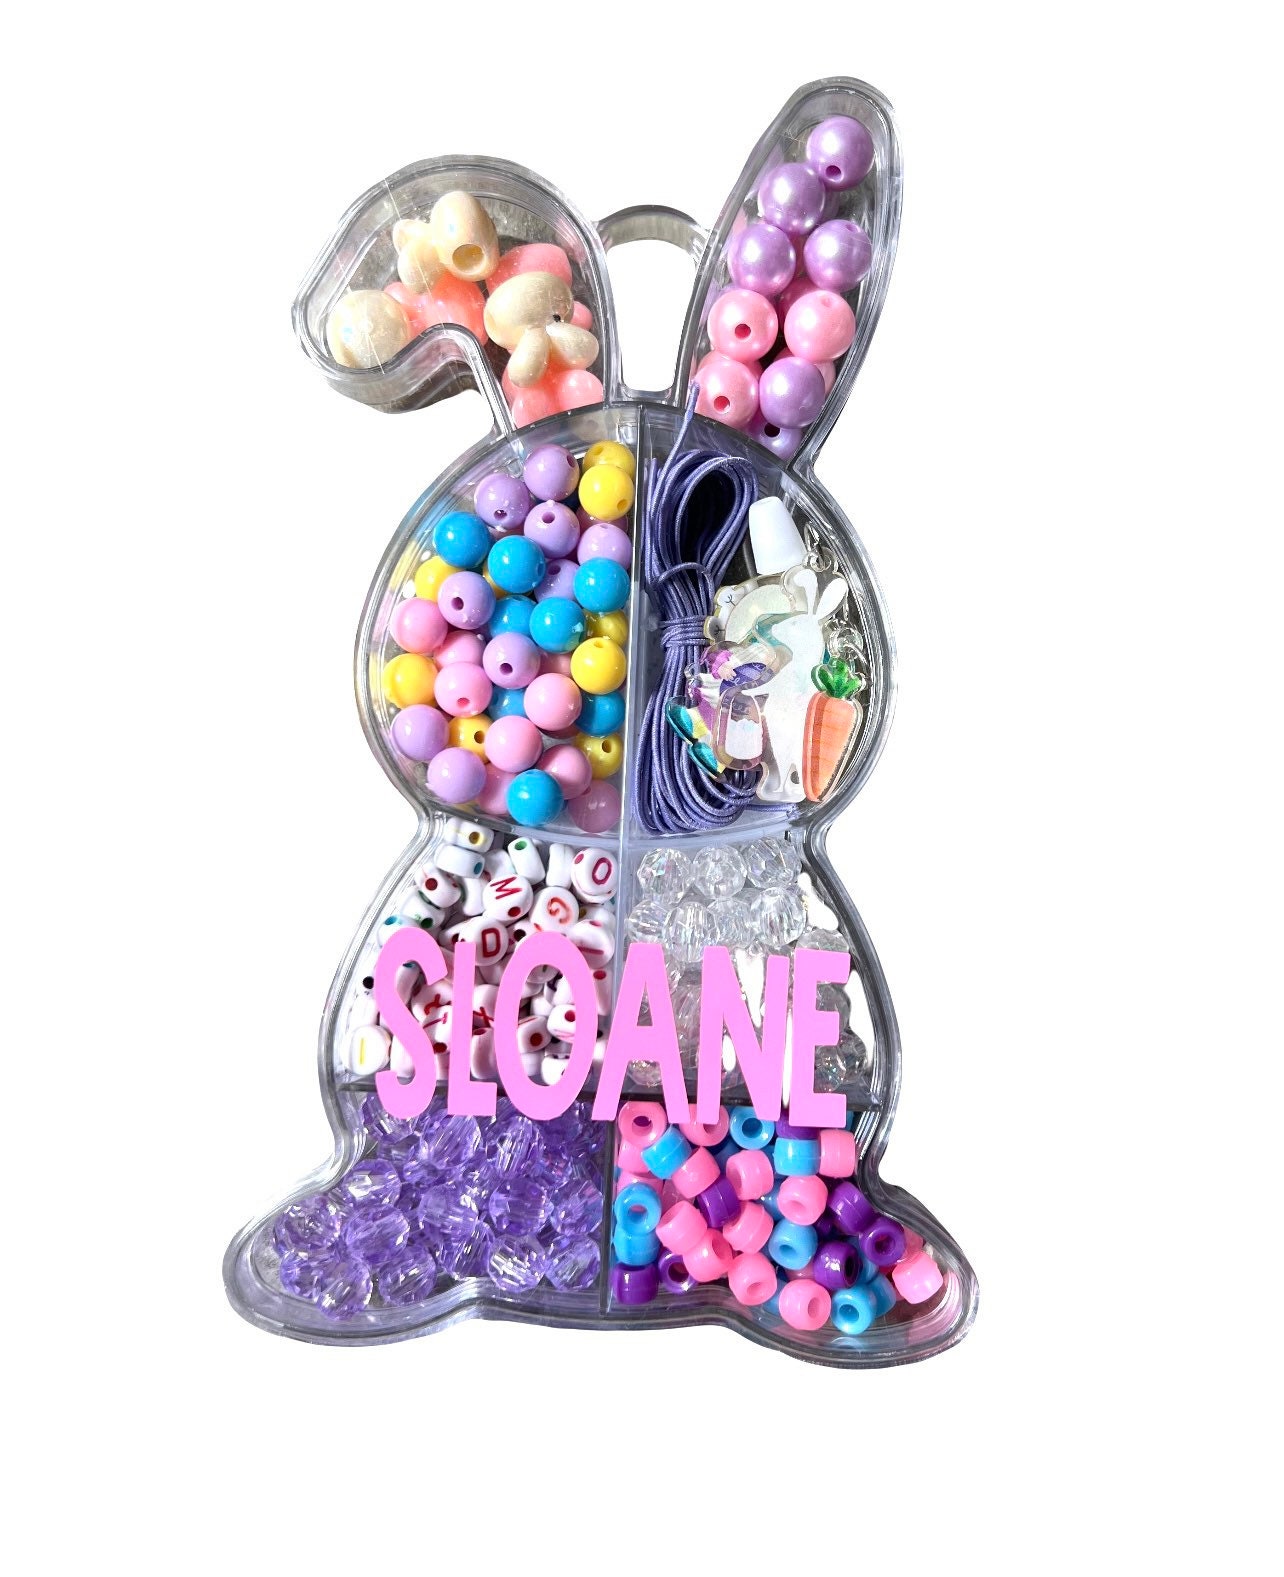 Easter Beading Kit – The Bead Shop